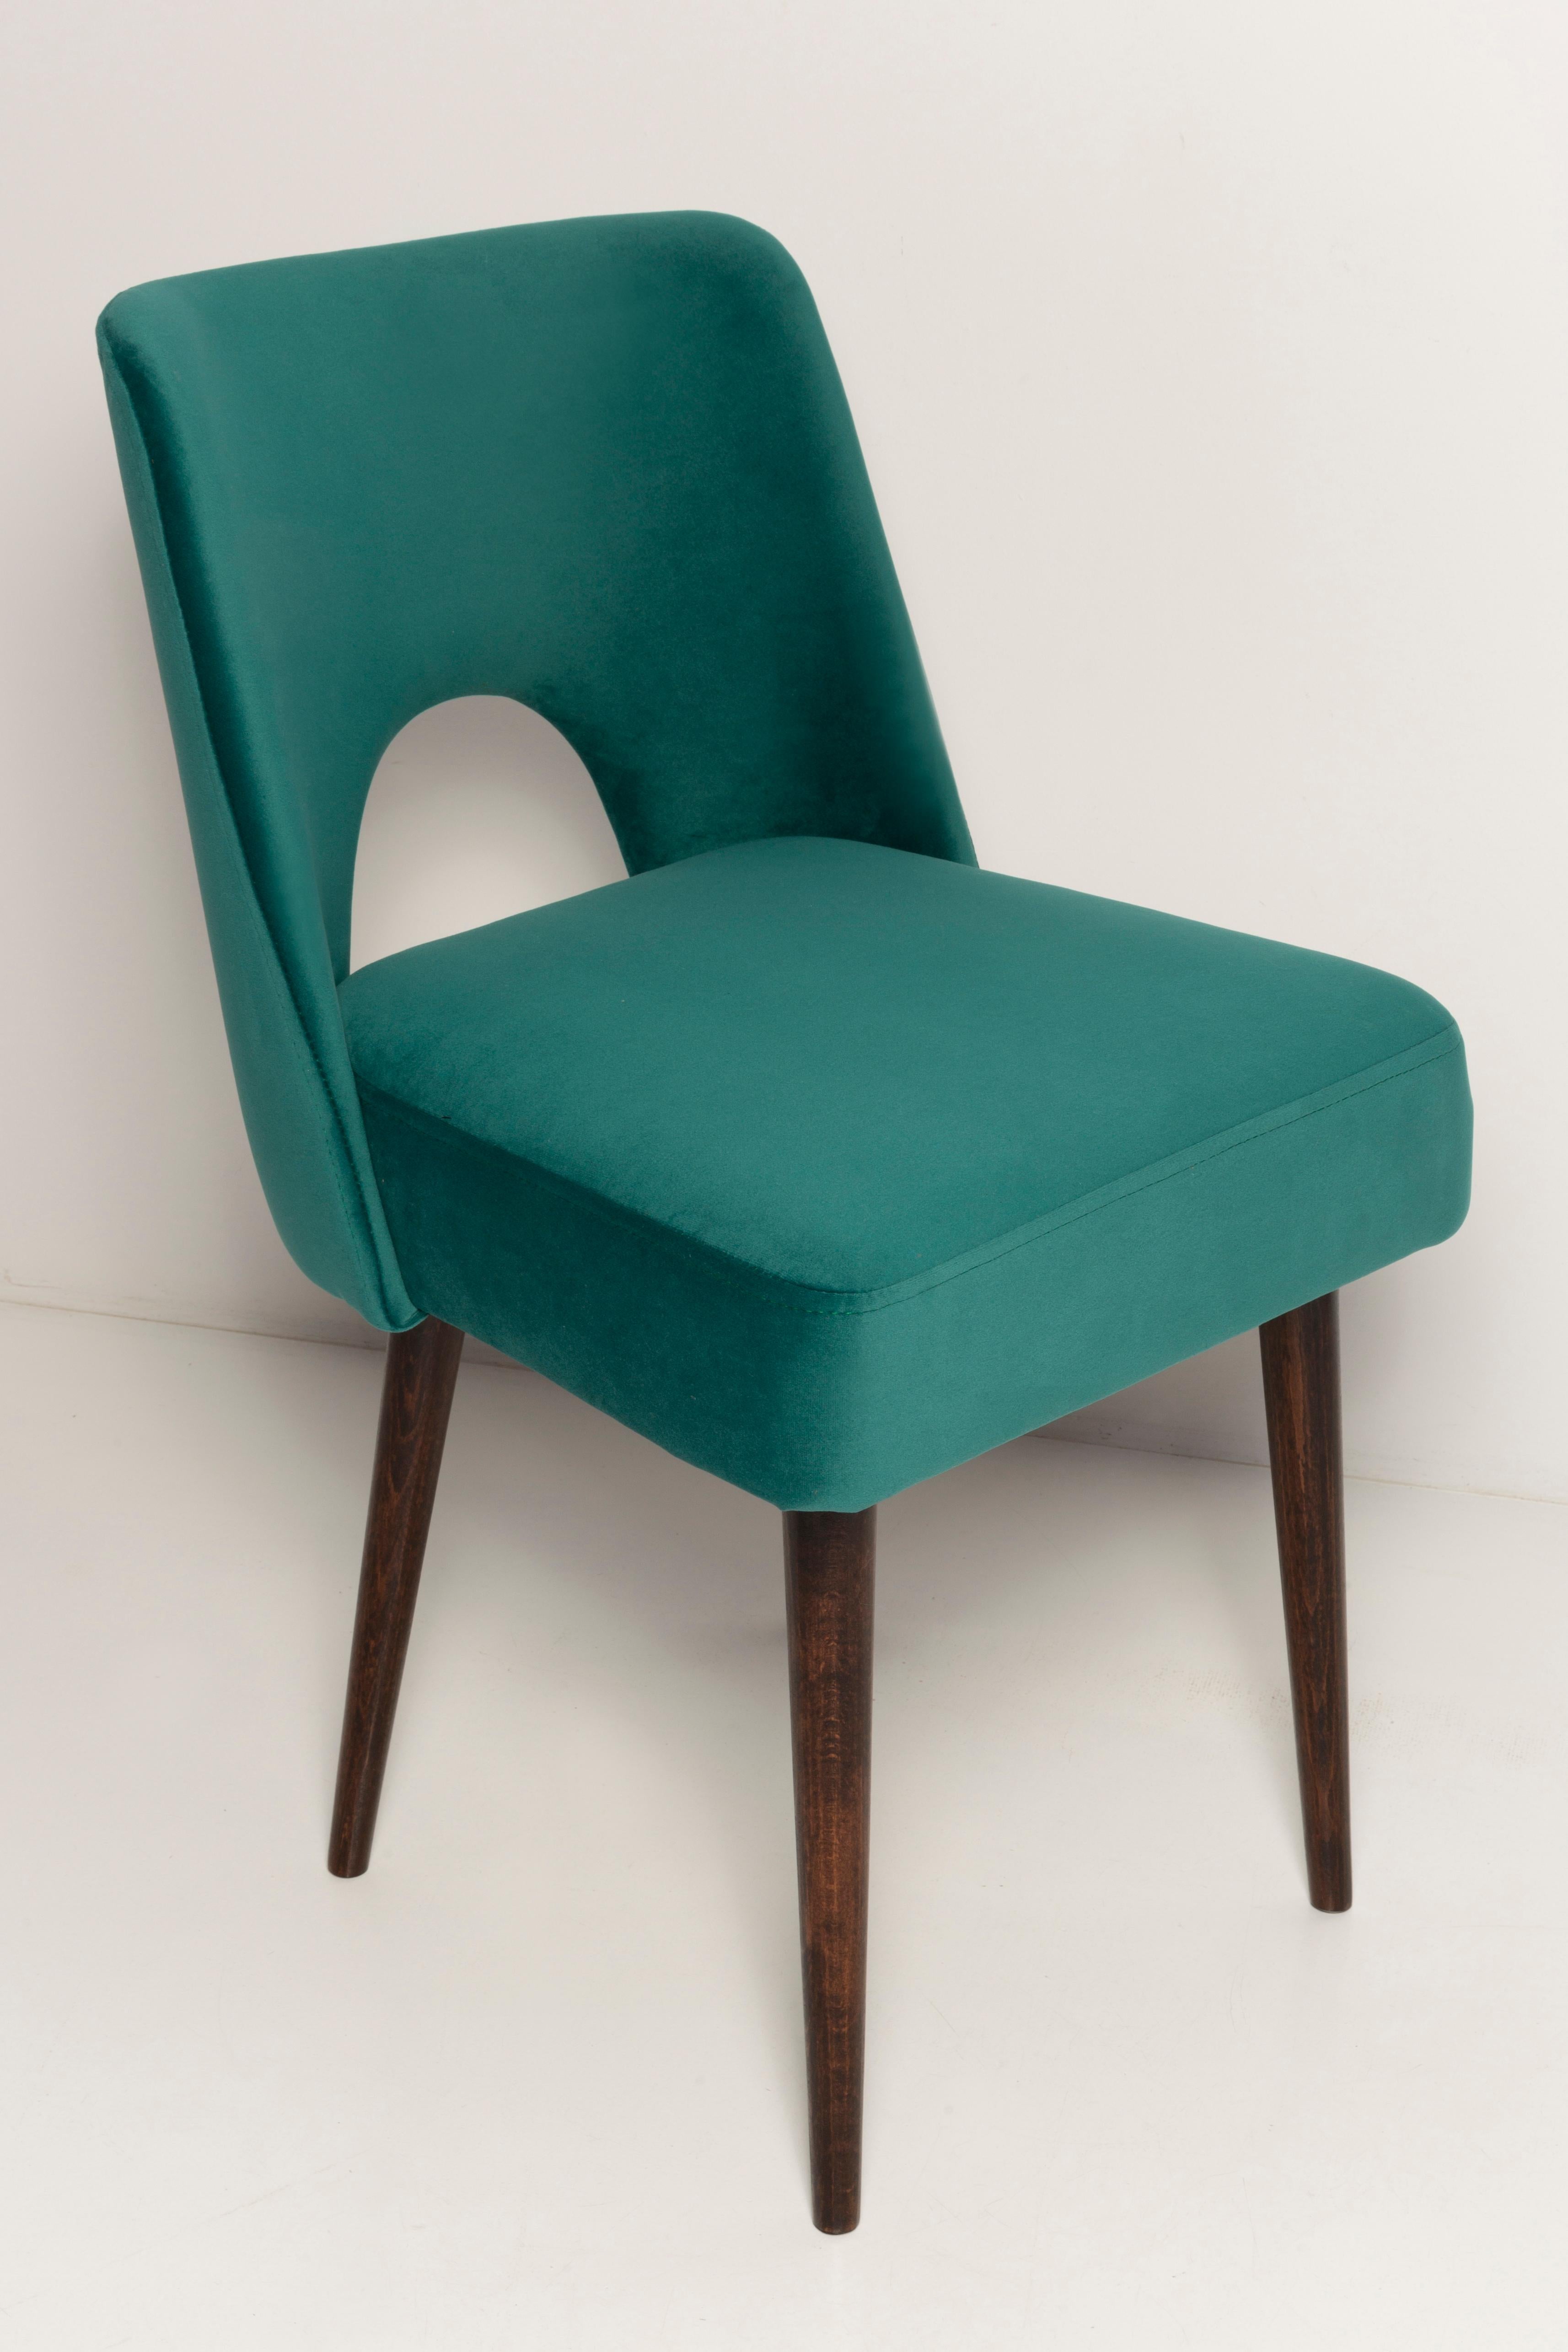 Hand-Crafted Dark Green Velvet 'Shell' Chair, Europe, 1960s For Sale